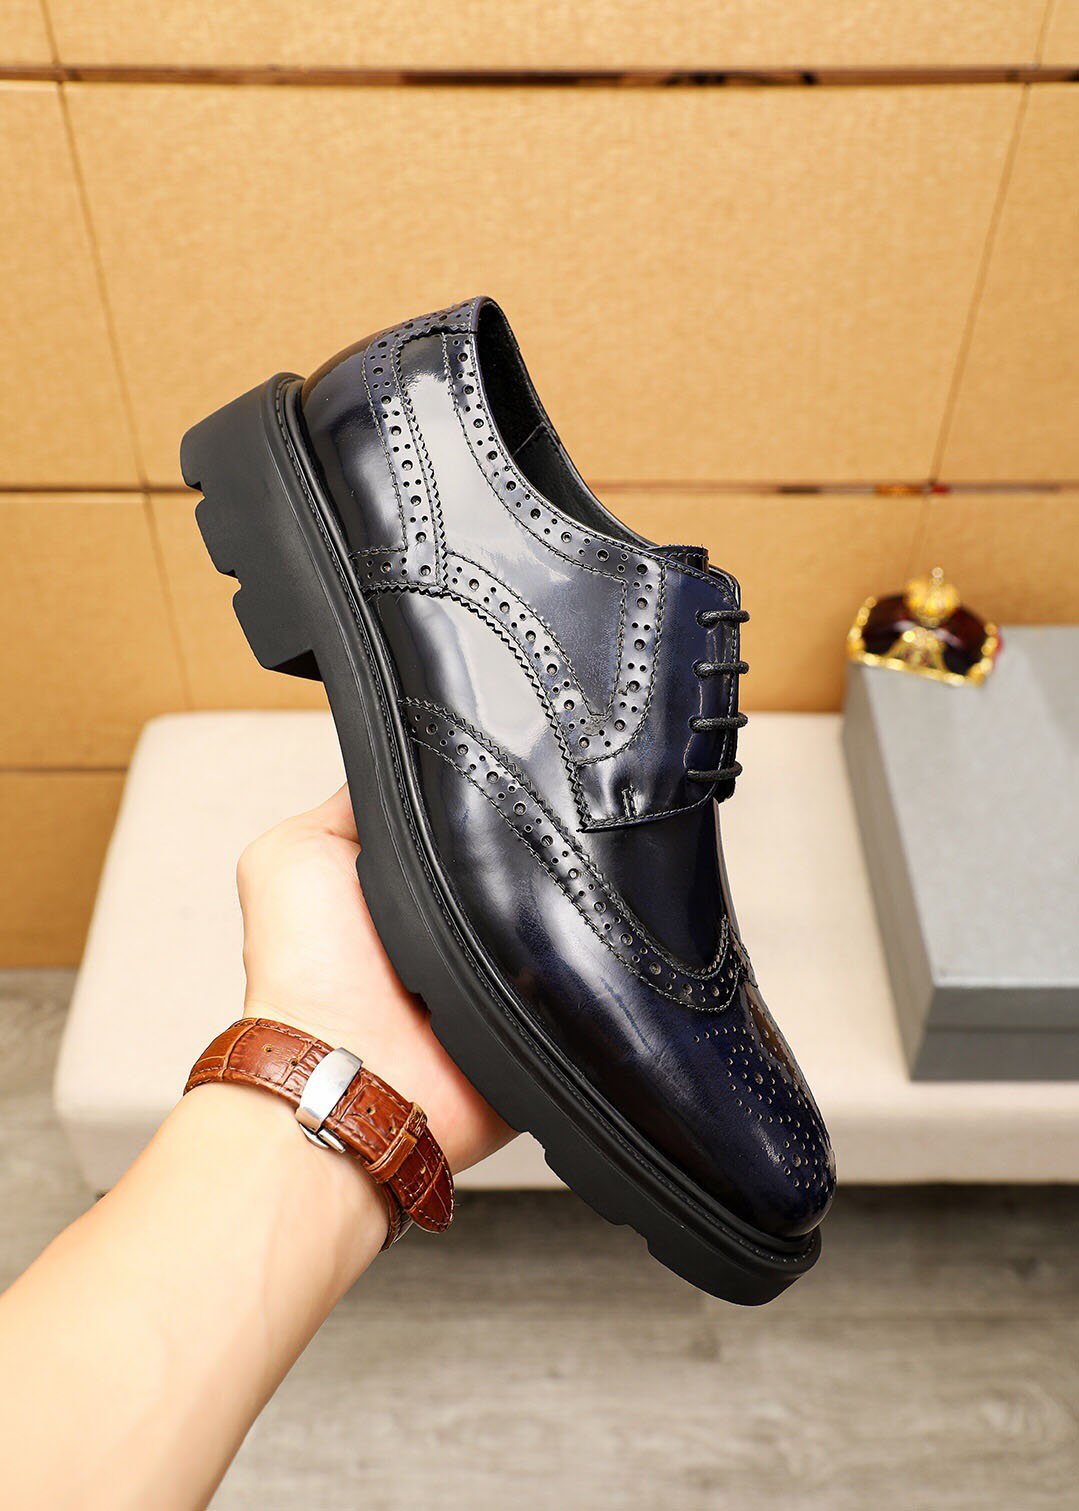 2023 Men Party Wedding Formal Dress Shoes Casual High Quality Brand Business Office Oxfords Genuine Leather Designer Flats Size 38-45